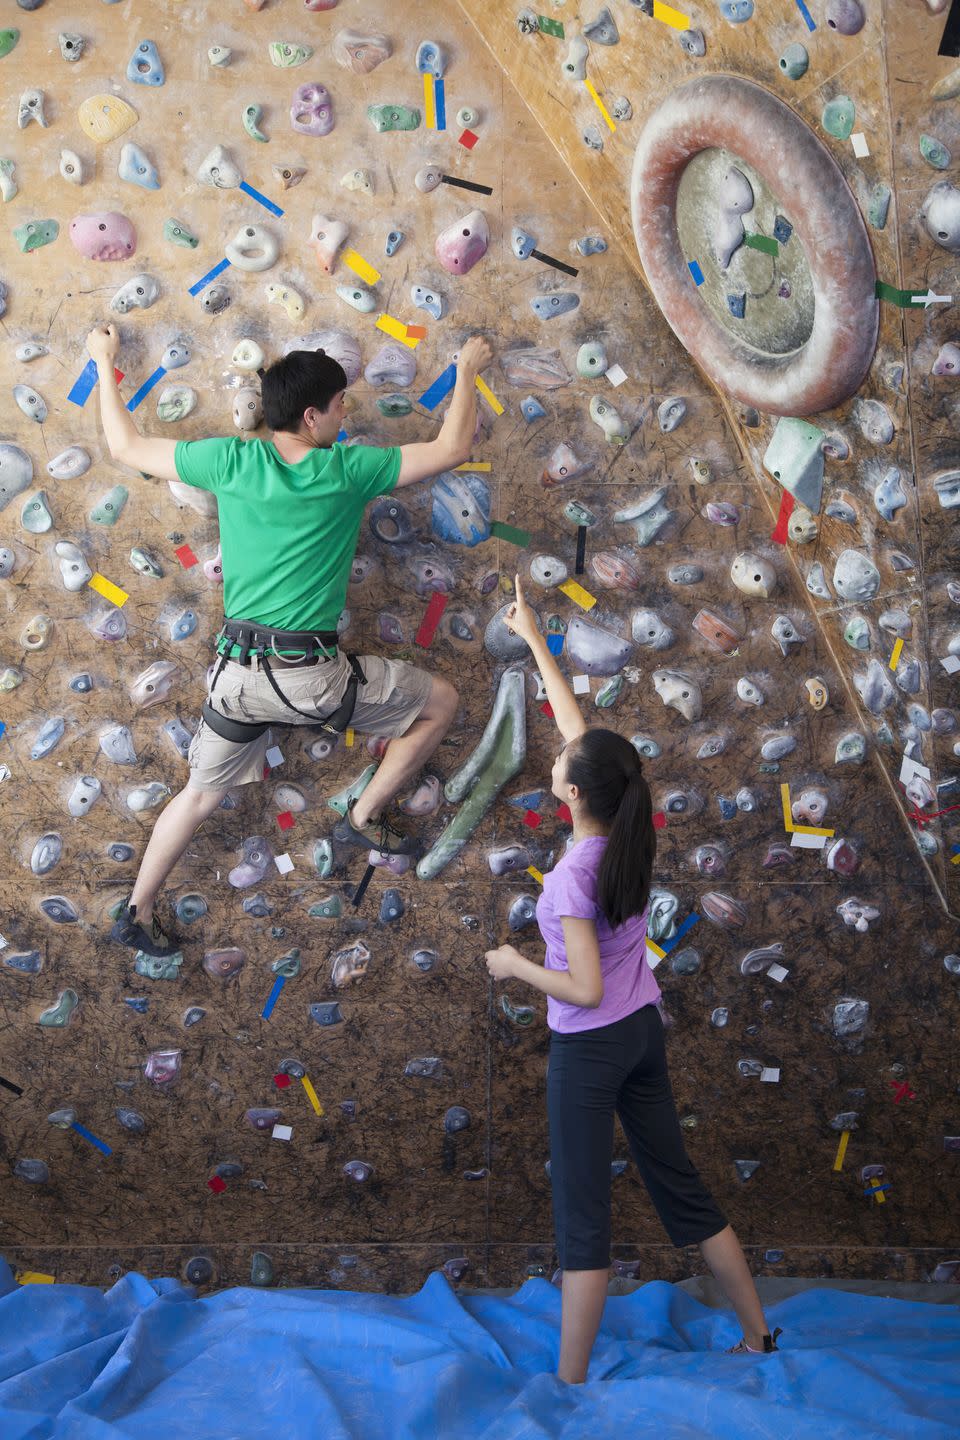 <p>With instructors typically available, you don't have to be rock jocks to get a kick out of climbing at an indoor gym. It's an adventure sure to get your adrenaline pumping and put big grins on your faces—not a bad way to spend a first date.</p>